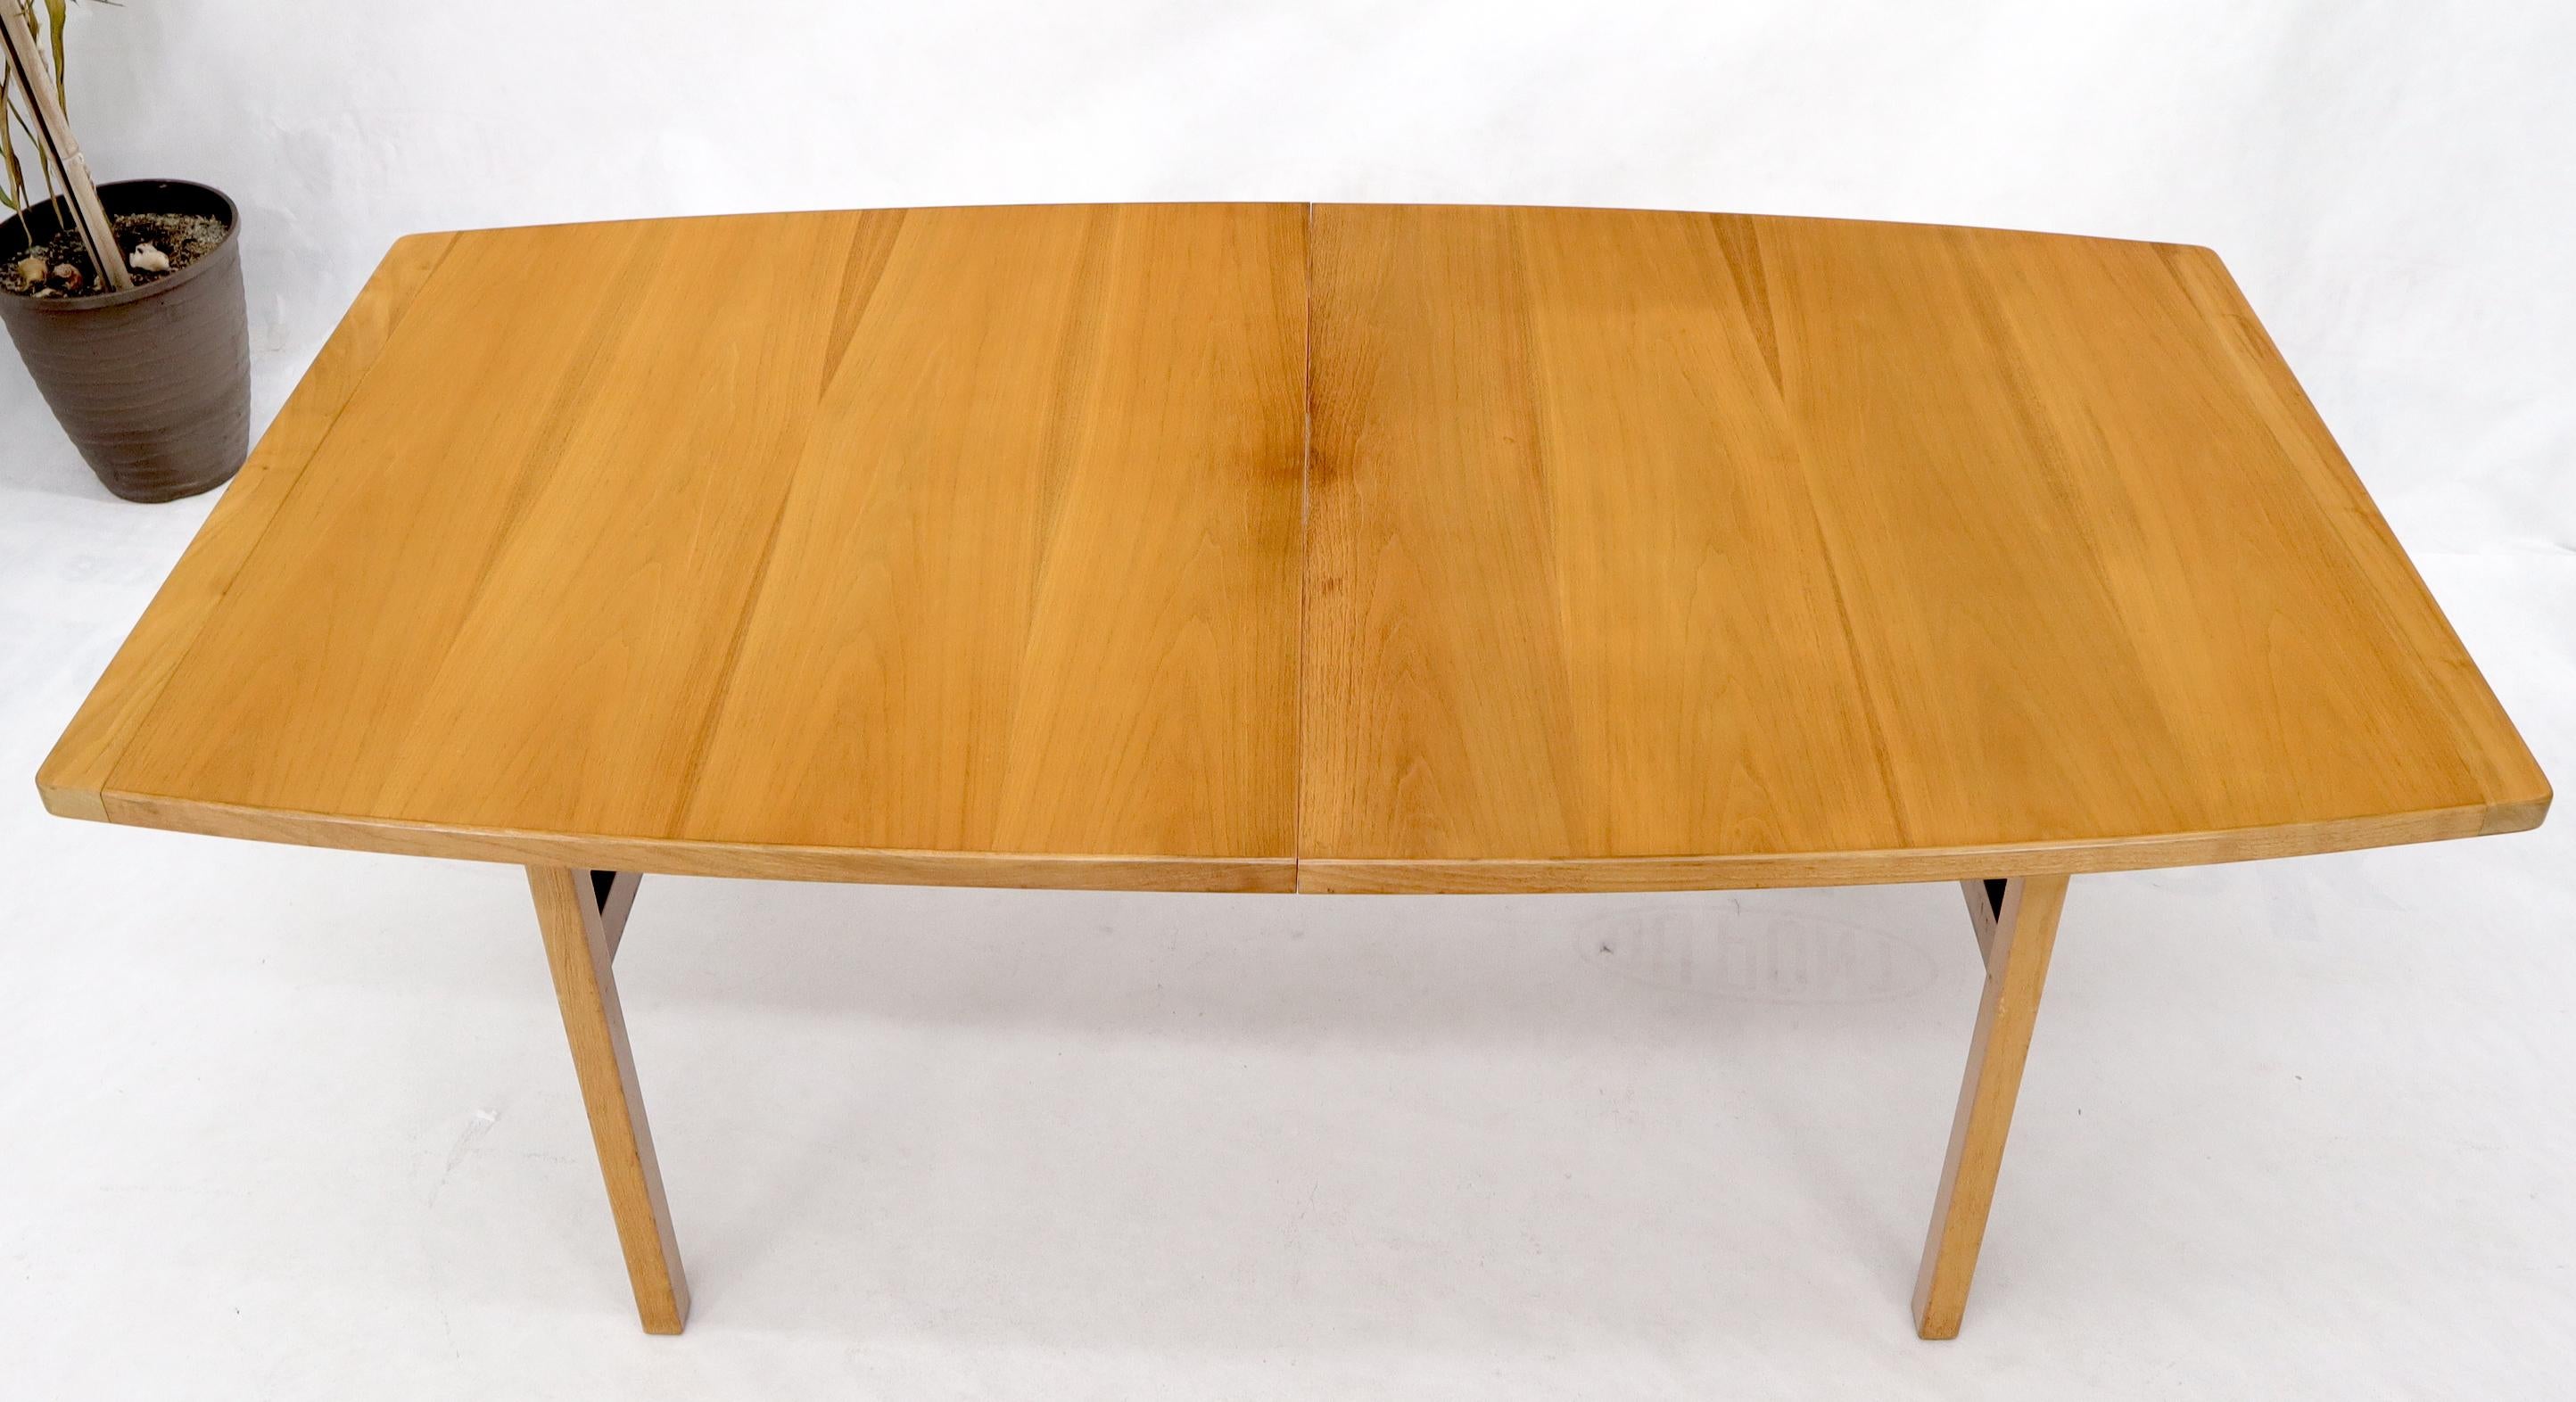 Lacquered Jens Risom Walnut Gate Leg Dining Table with Extensions Boards